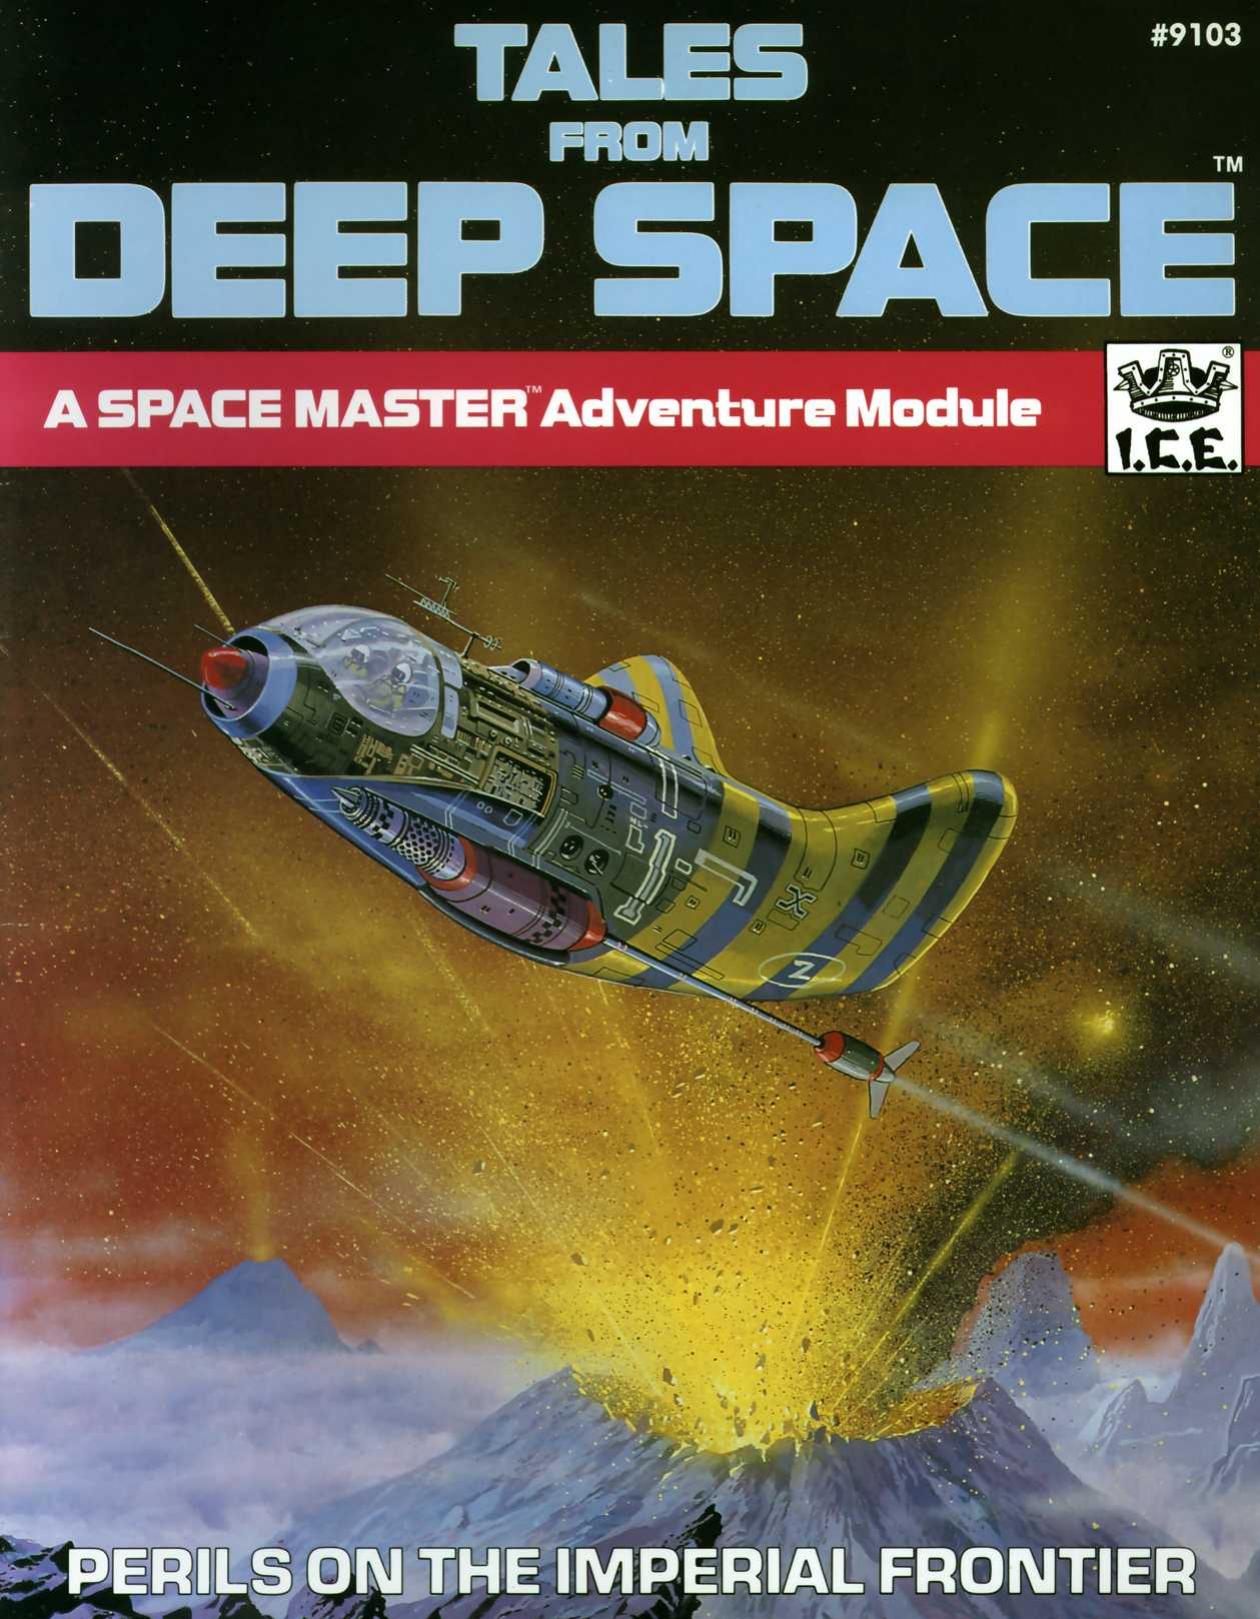 (ICE9103) - Spacemaster - Tales From Deep Space